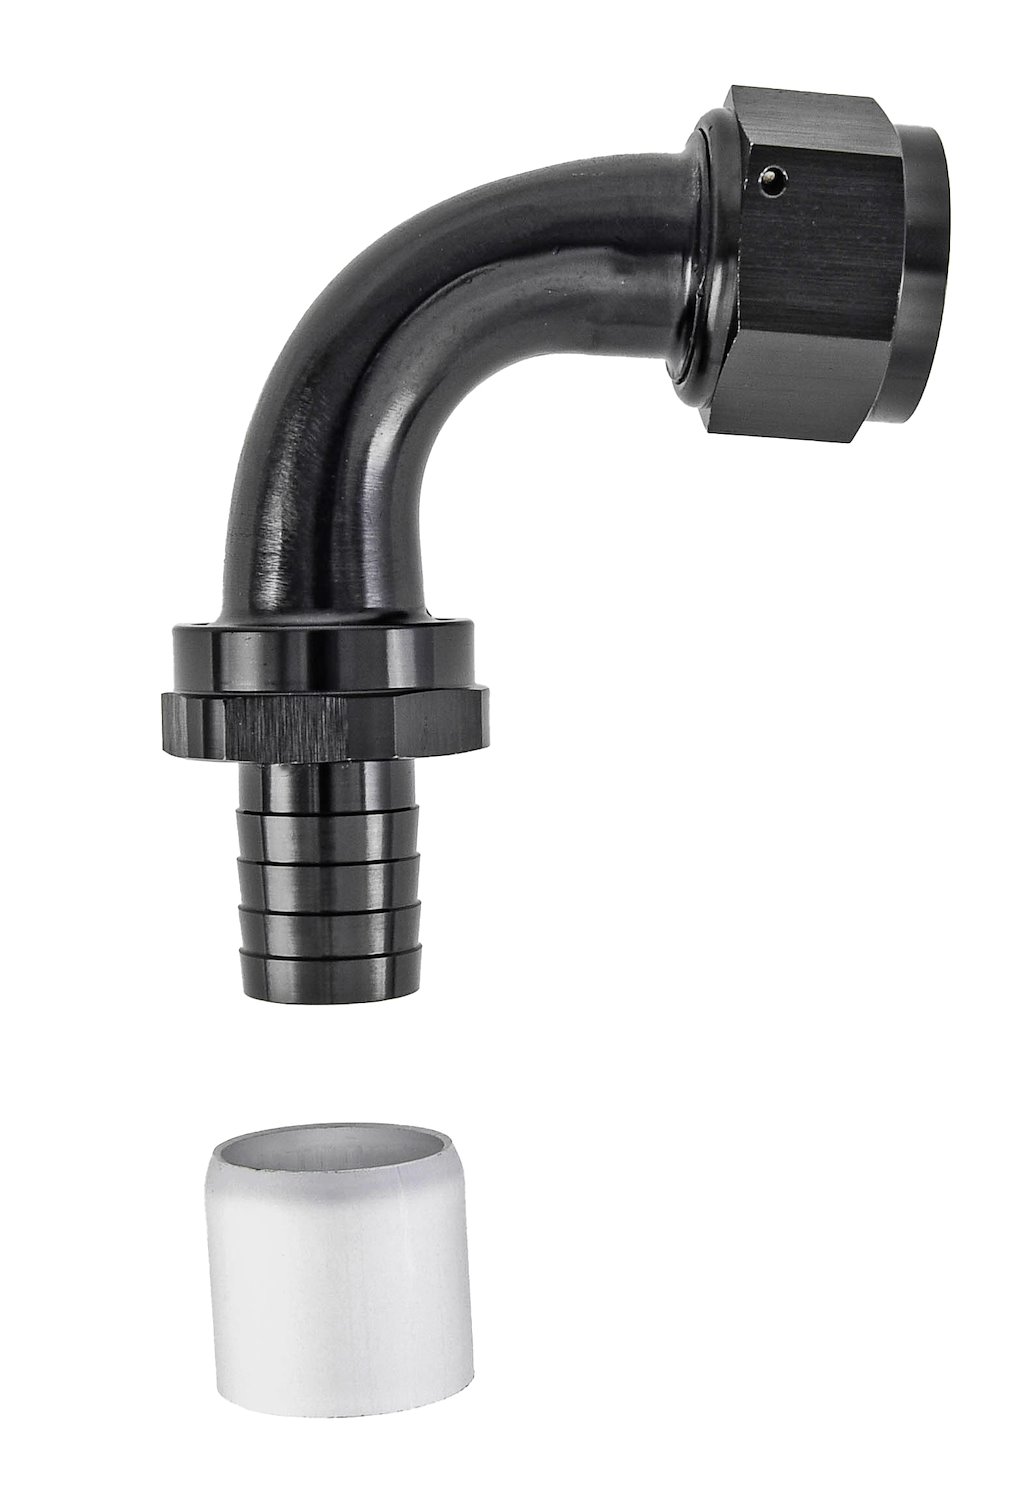 90-Degree AN Crimp-On Hose End Fitting [-16 AN Female to -16 AN Hose, Black]